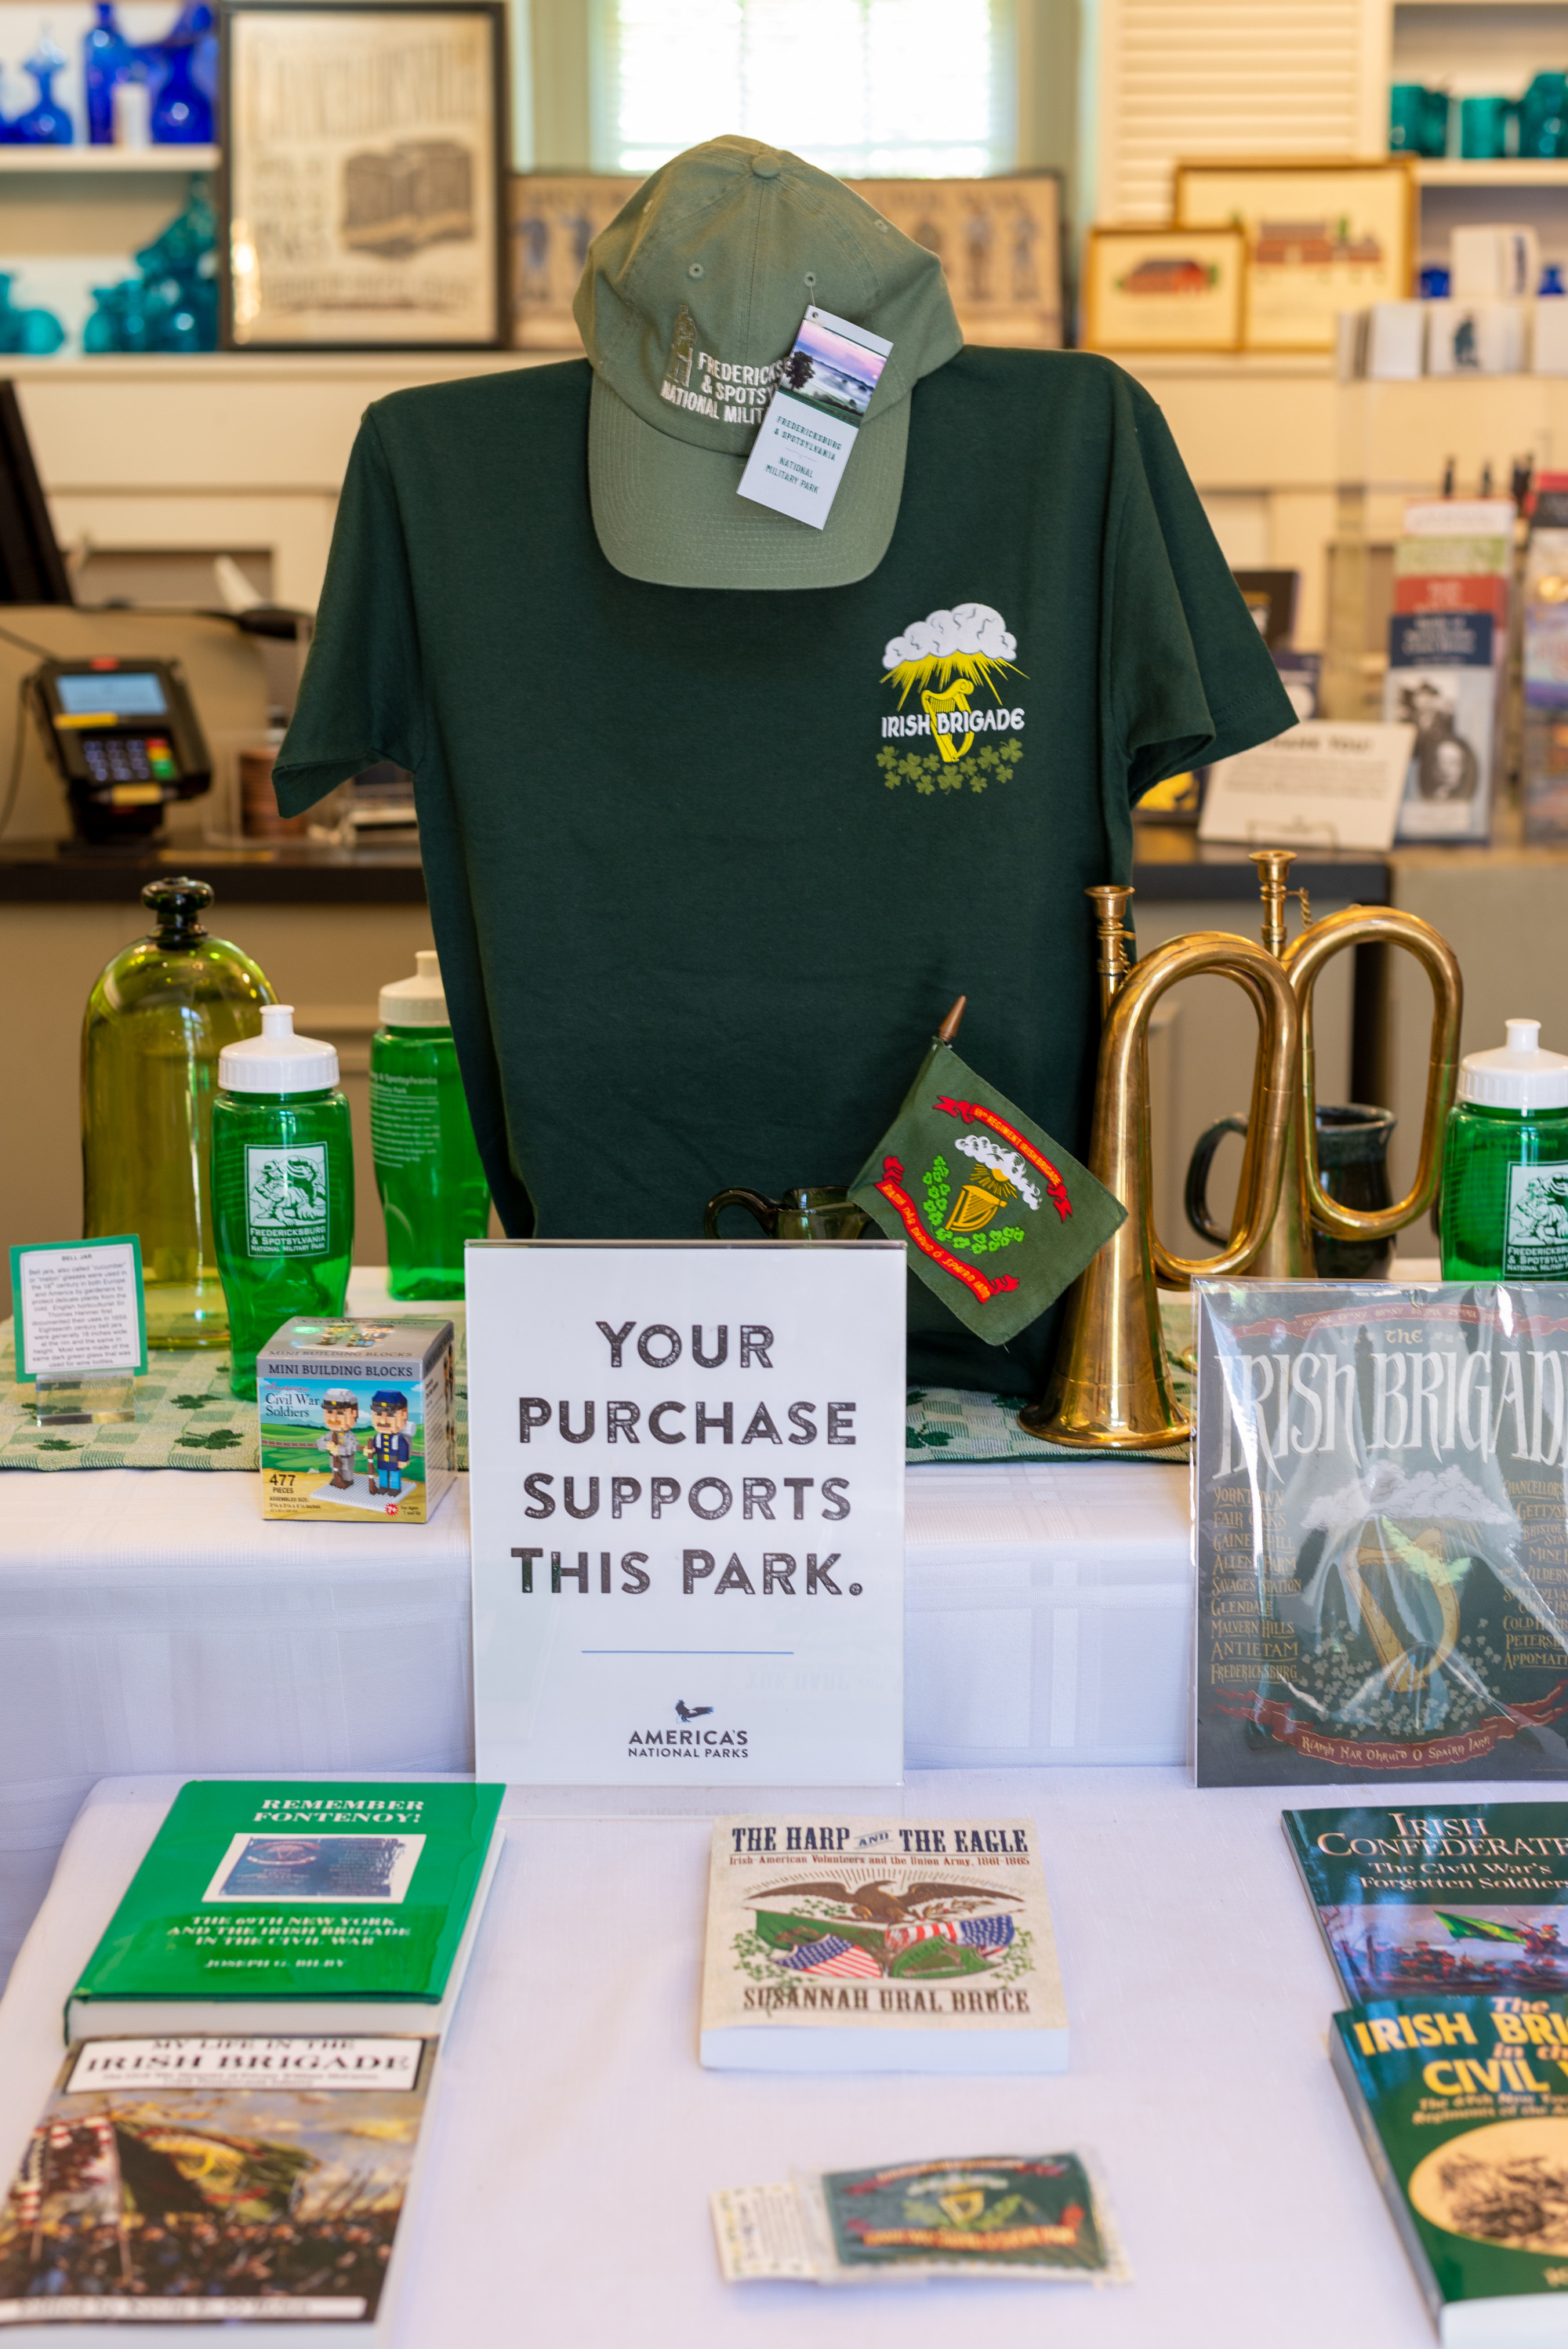 A gift shop display with books and t-shirt, all green and about the Irish Brigade.